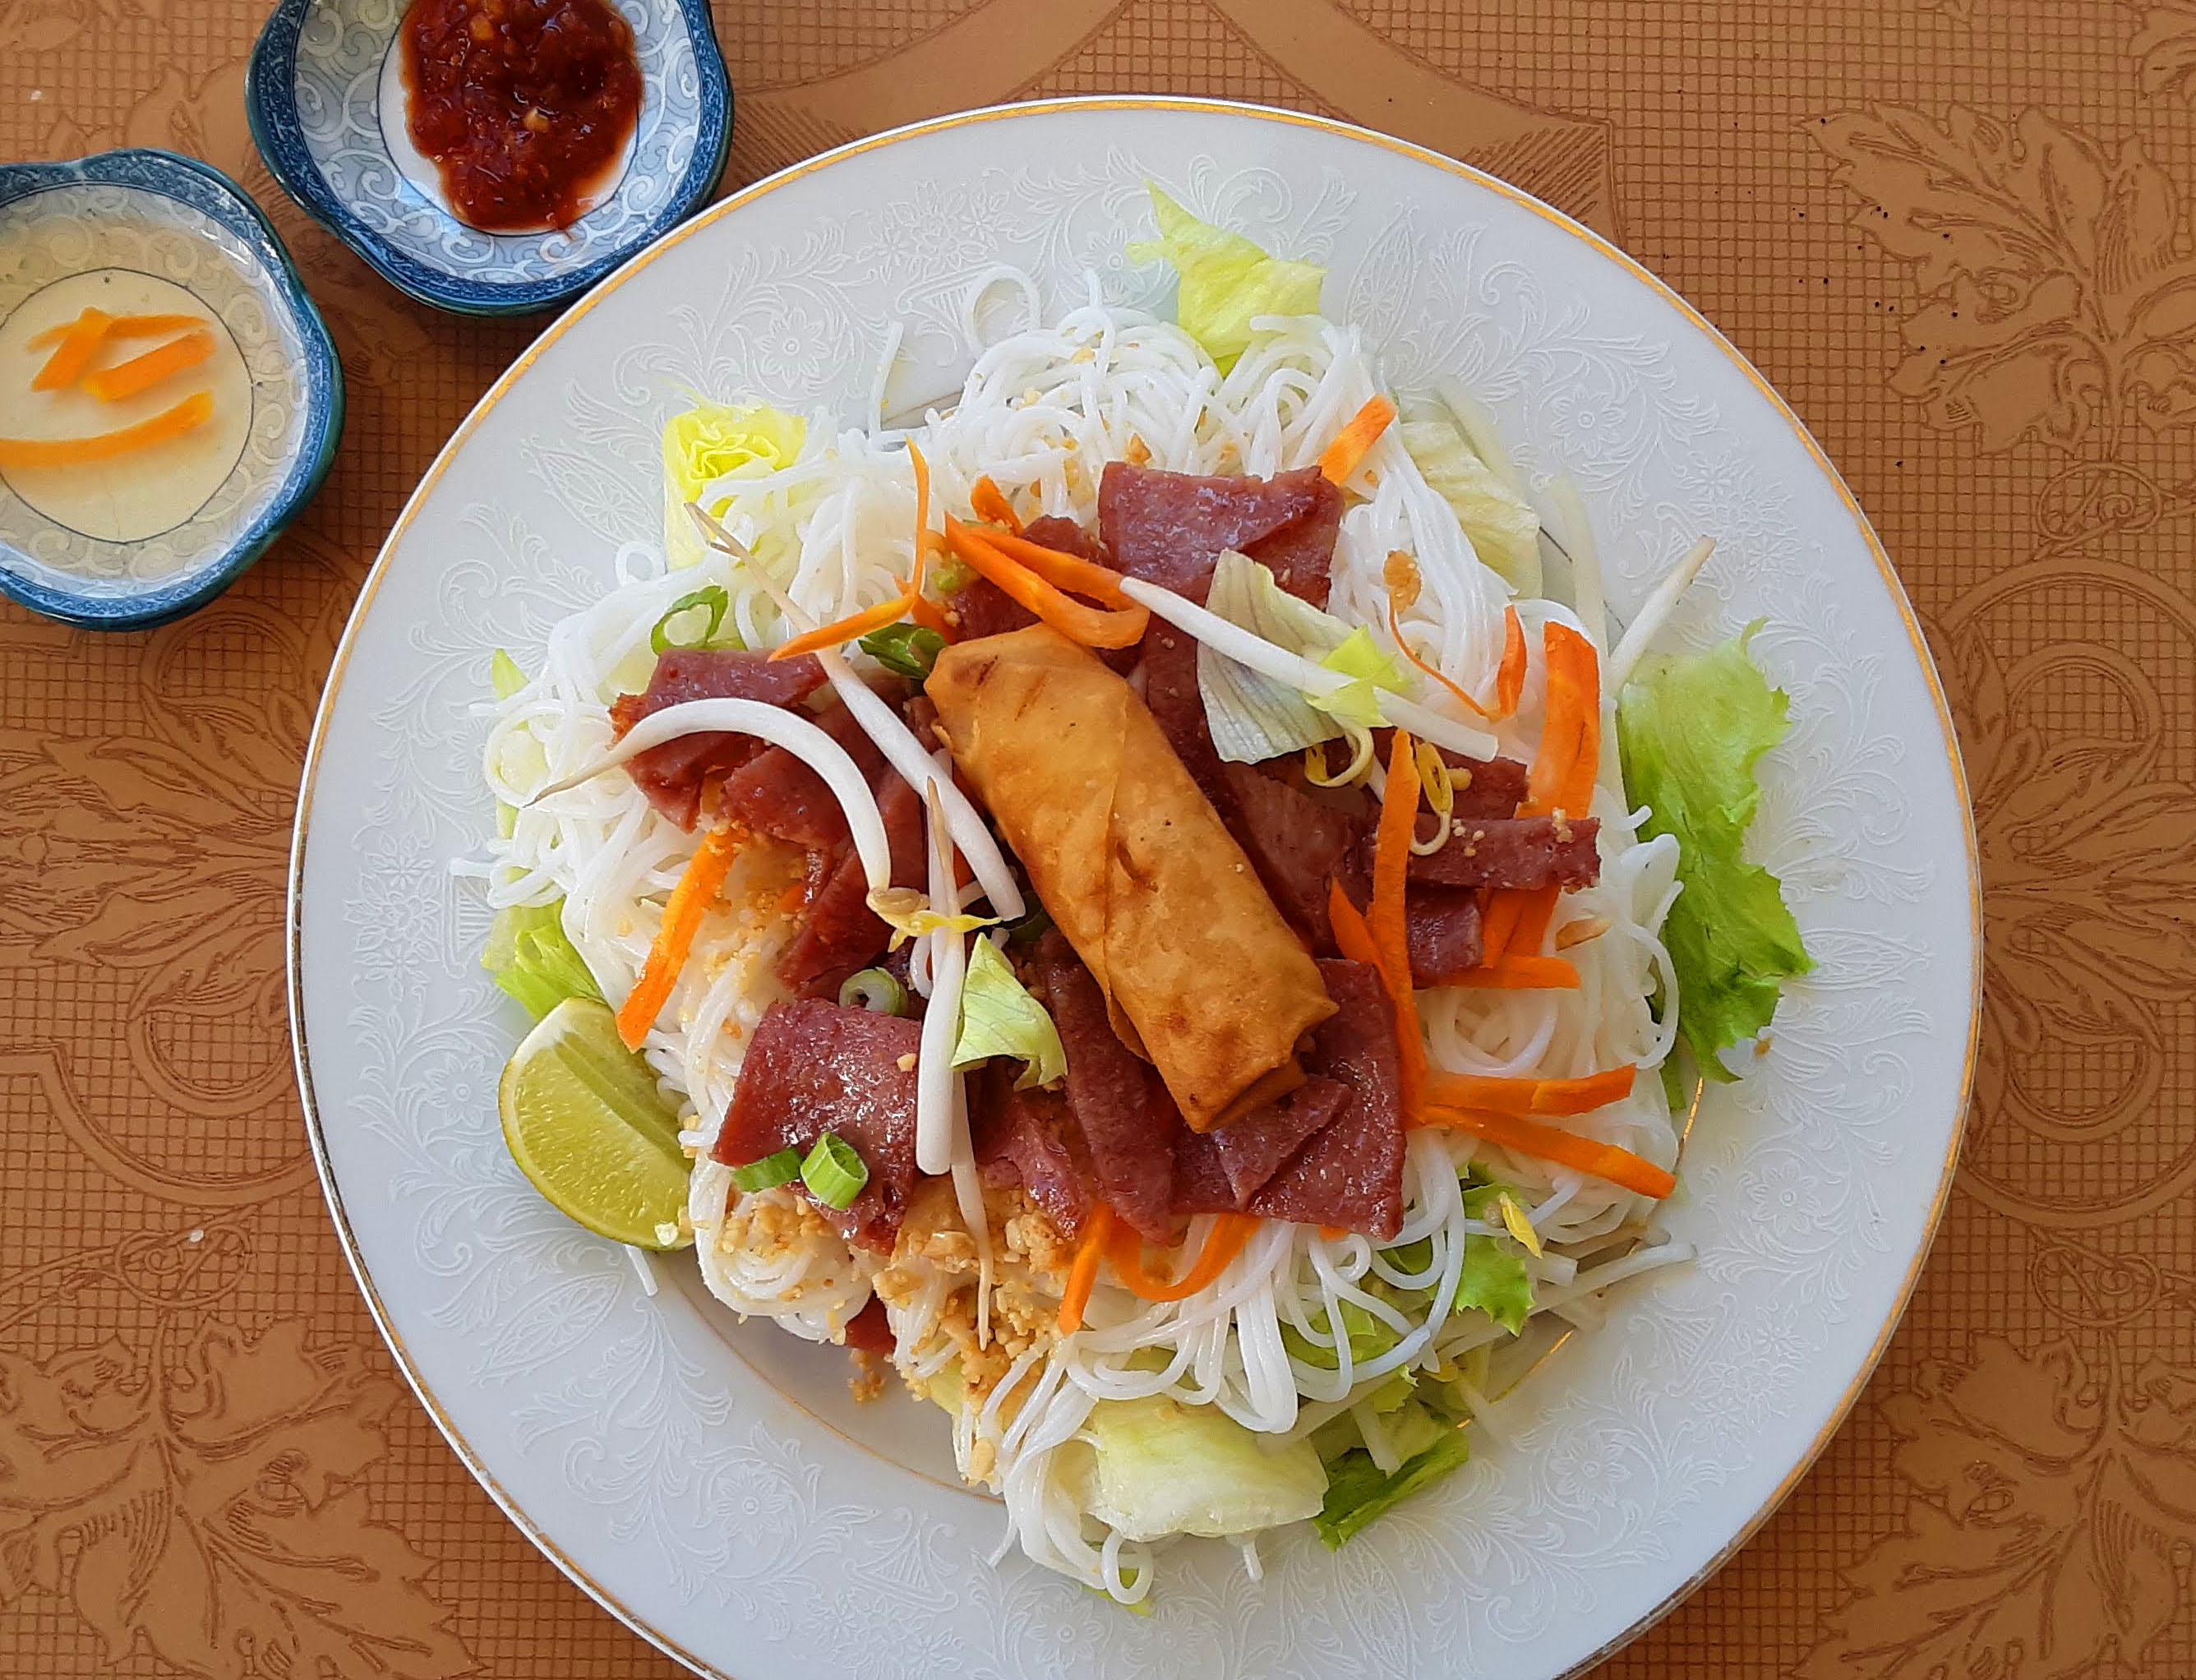 On a white plate, there is a bun nem nuong salad. Photo by Paul Young.